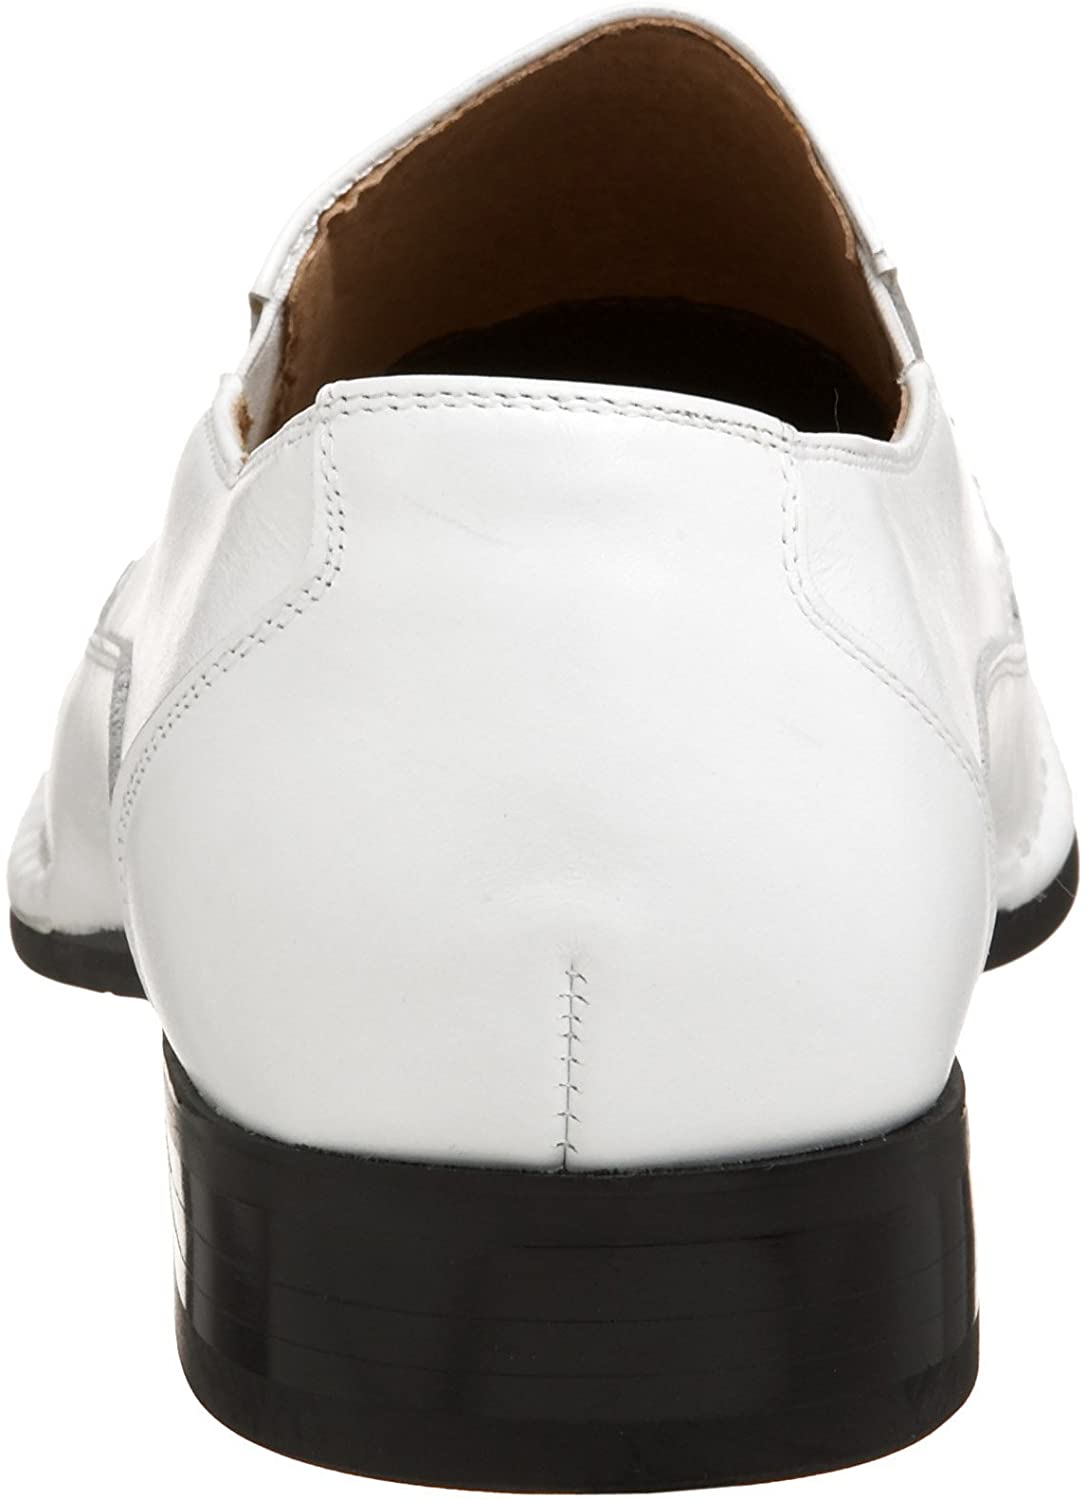 Men's Stacy Adams Templin 24507 White Leather 11 M - image 3 of 7